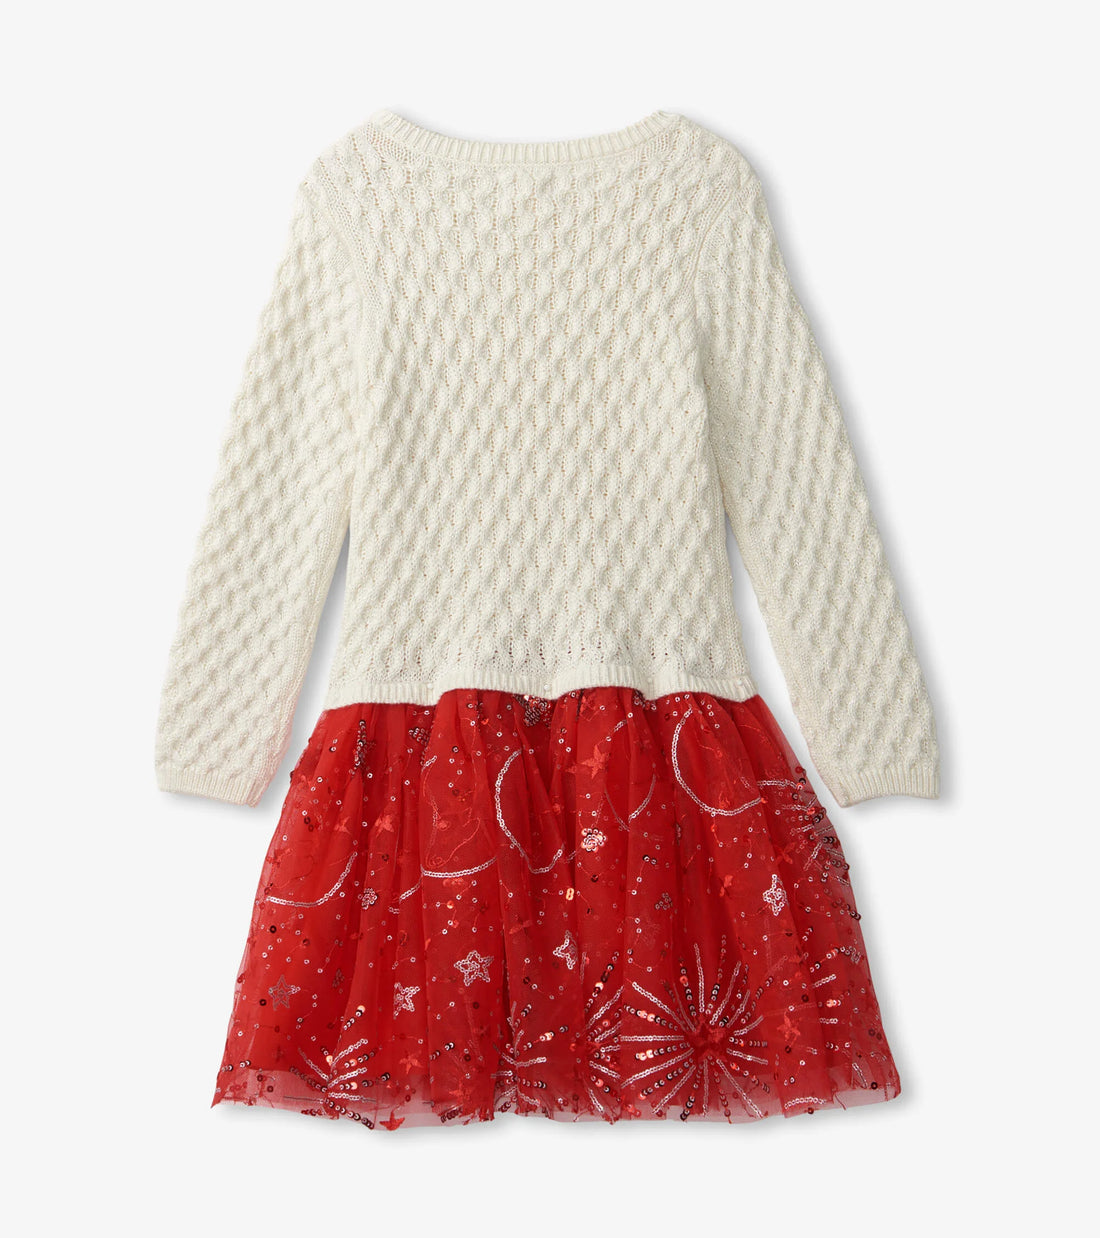 cream sweater top with red sparkle tulle skirt at bottom